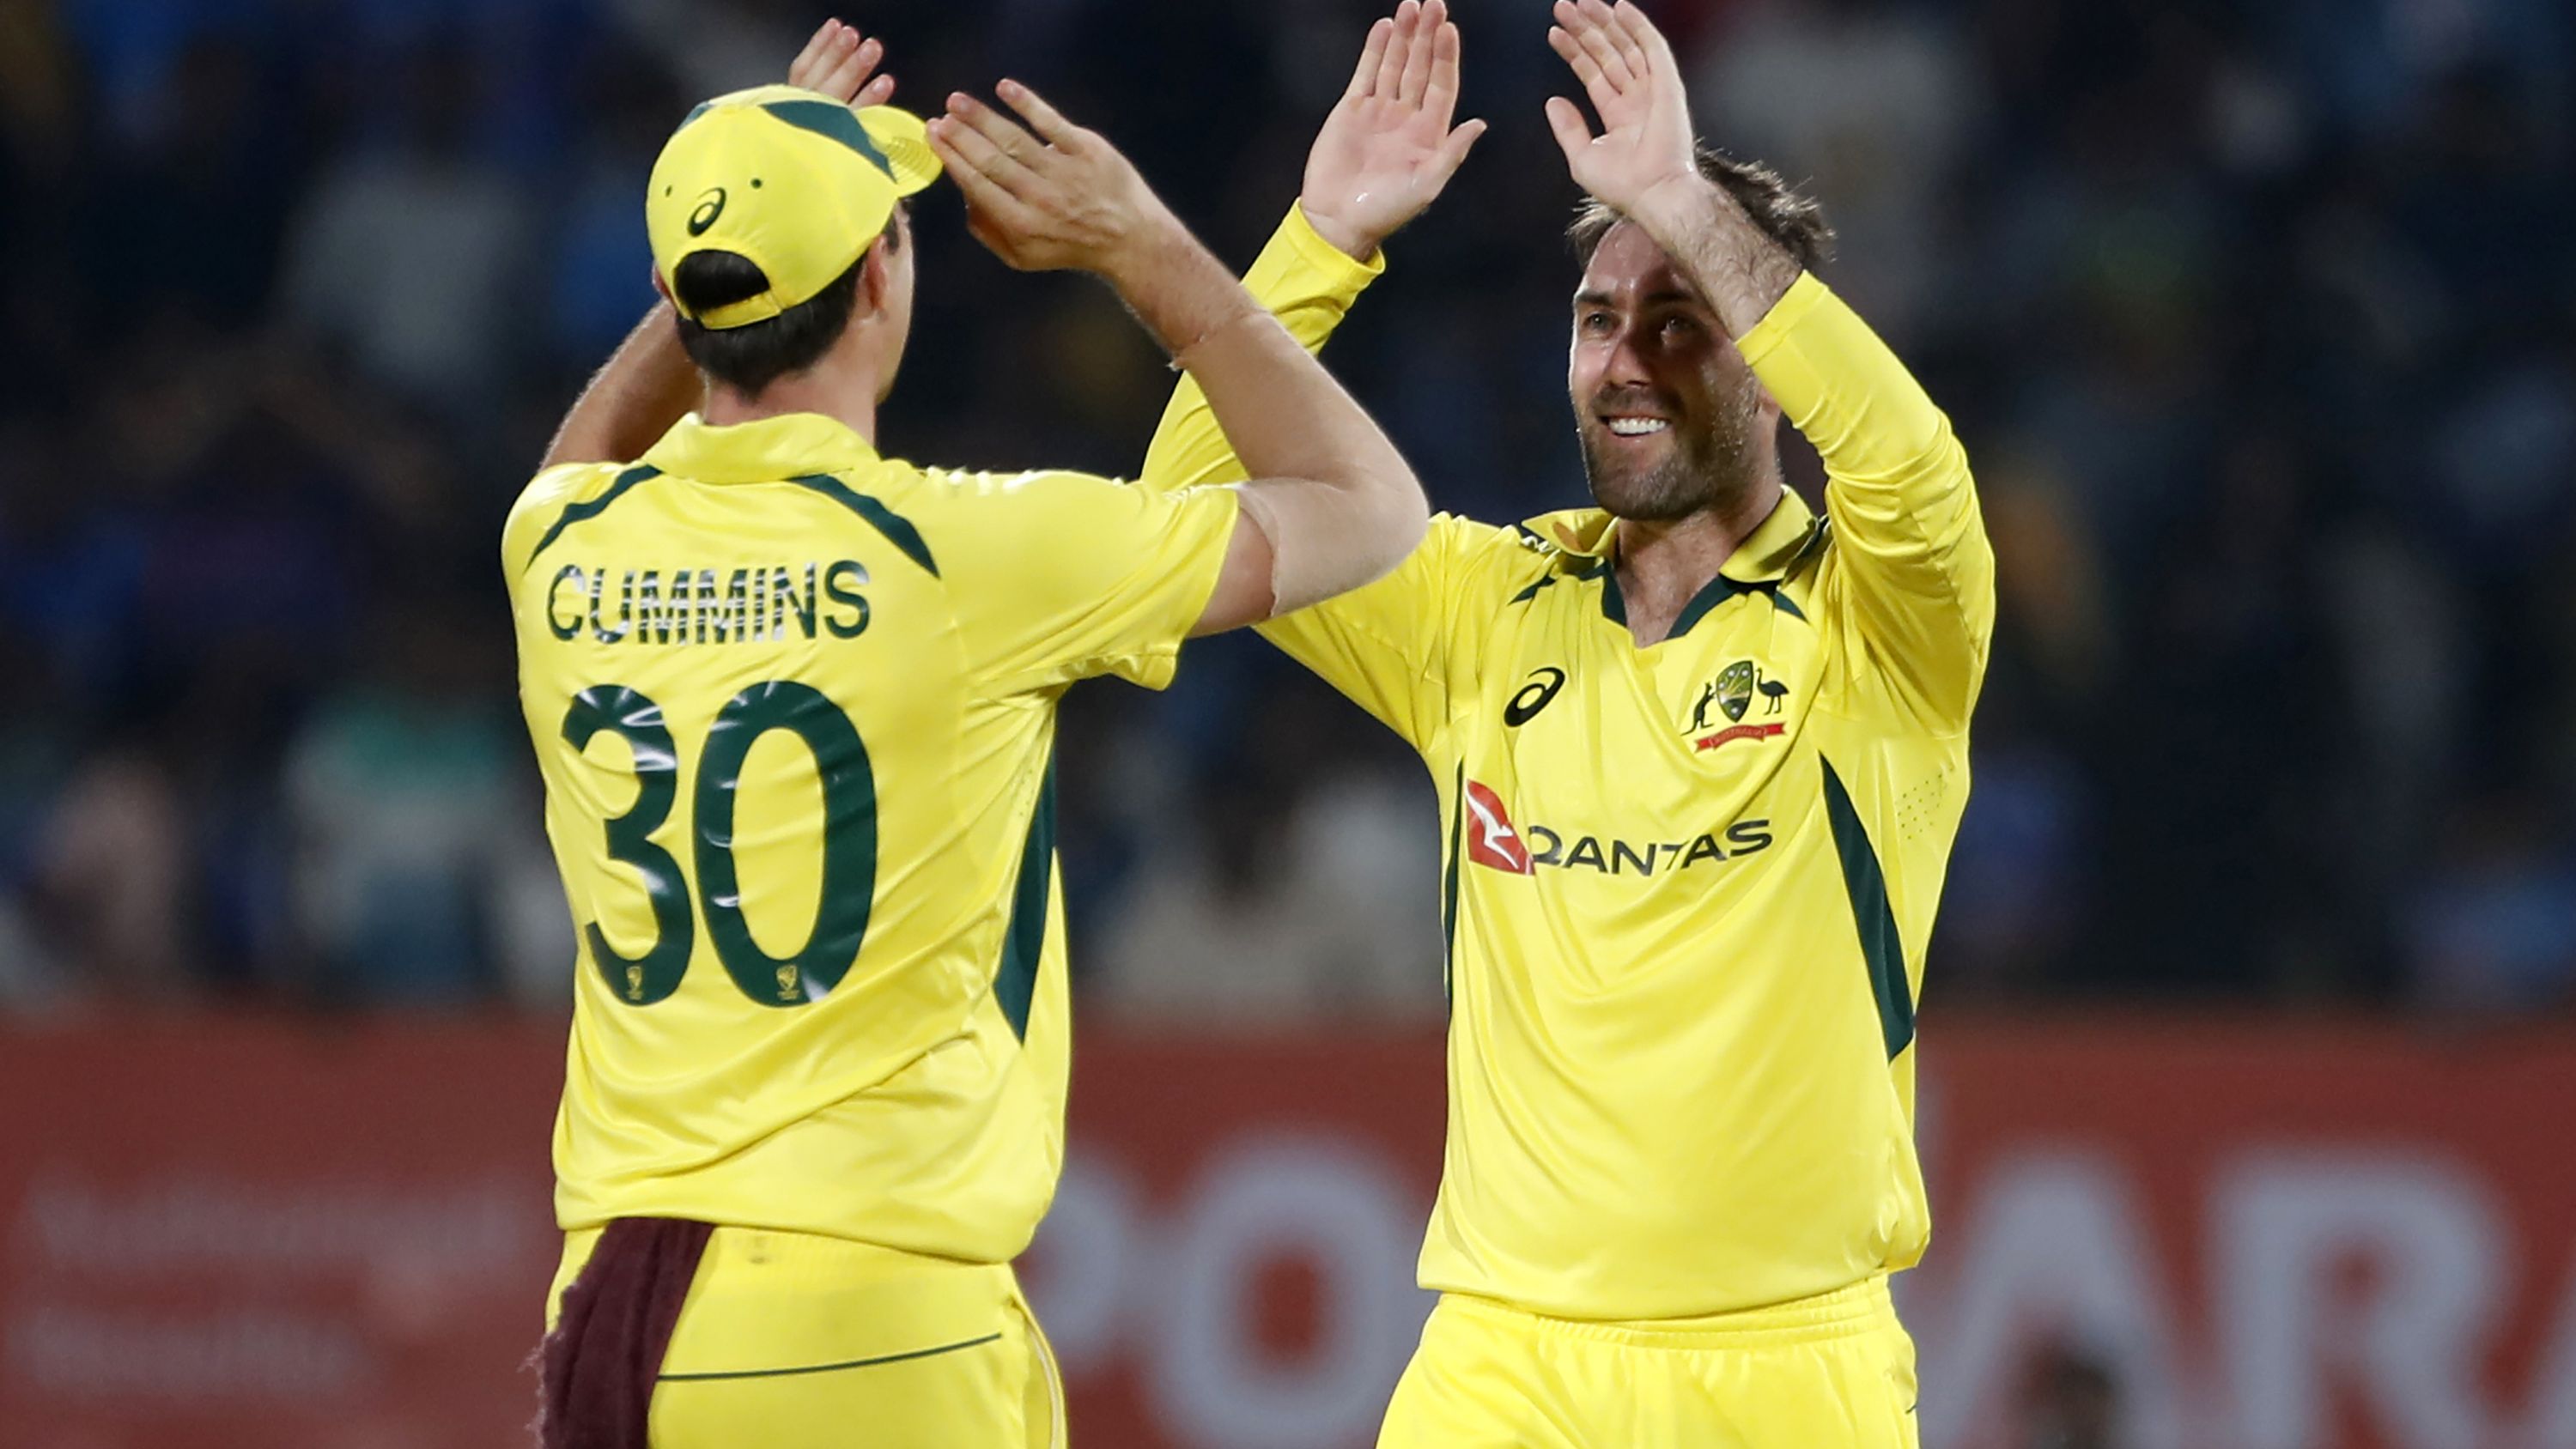 Glenn Maxwell steamrolls India's top order as Aussies score consolation win before World Cup